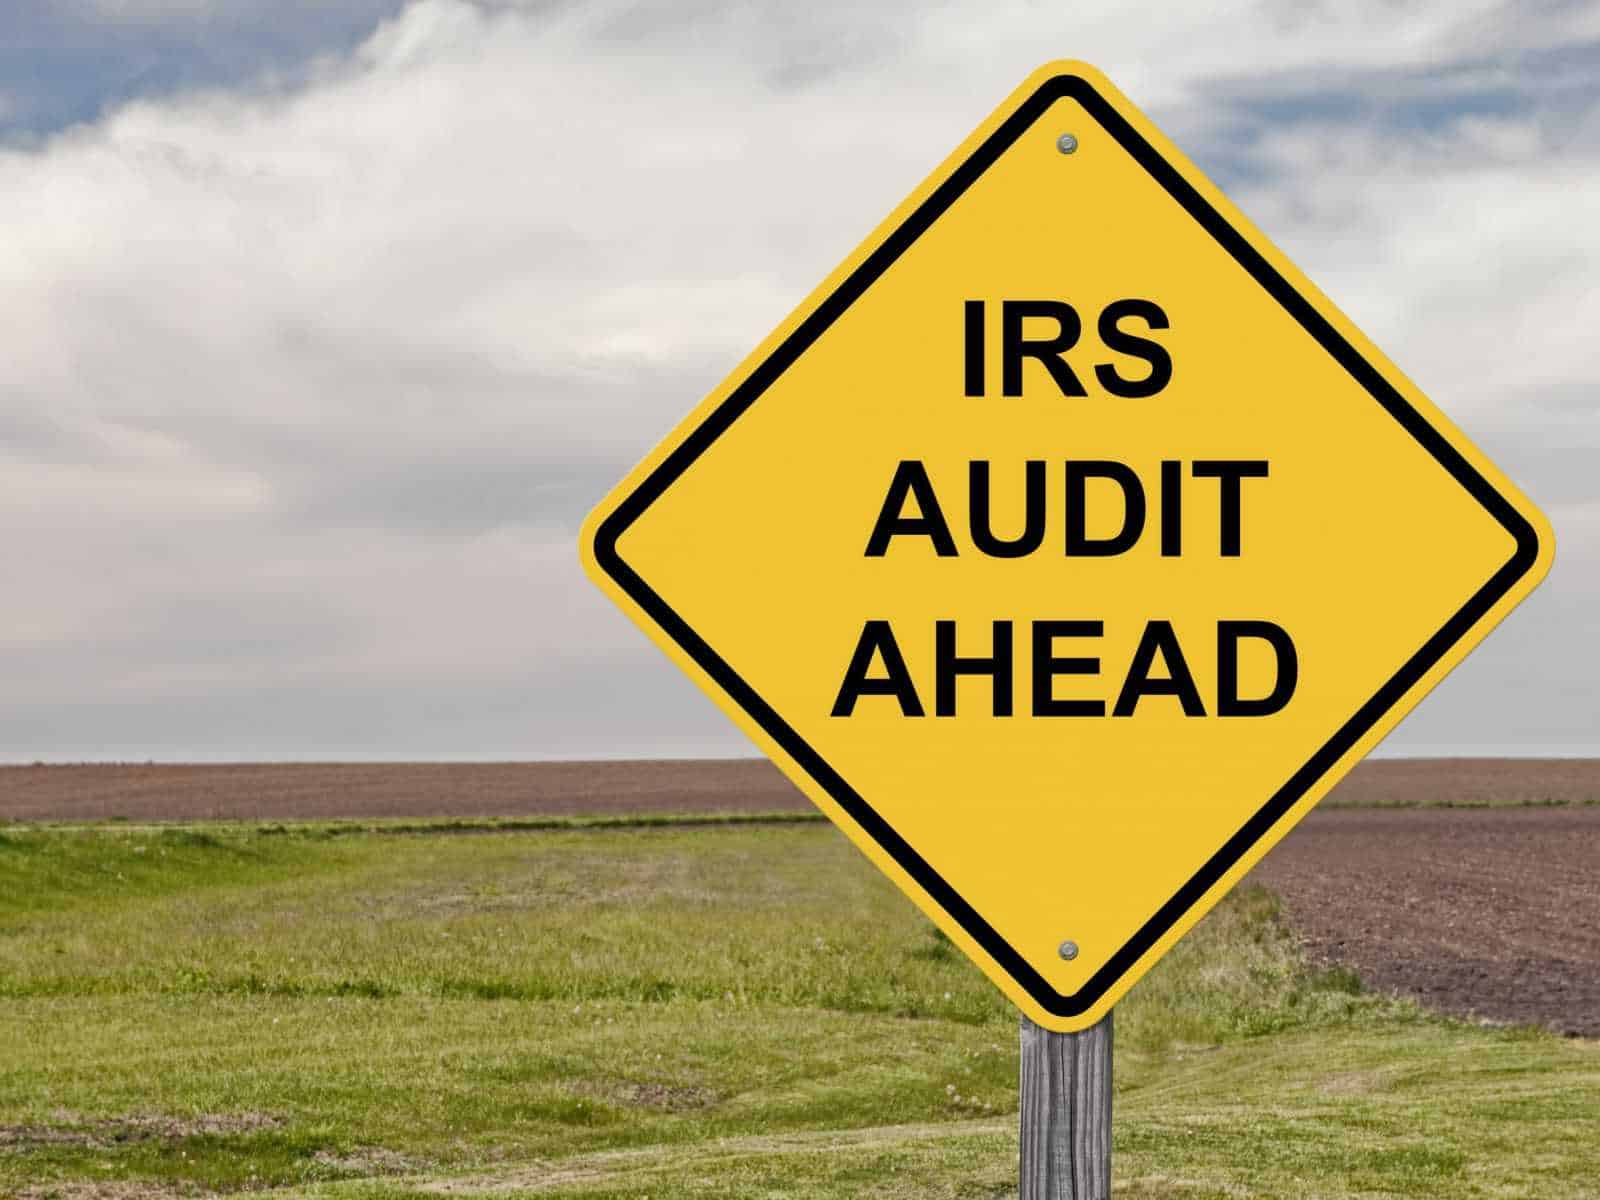 How Many Years Can an IRS Audit Go Back?